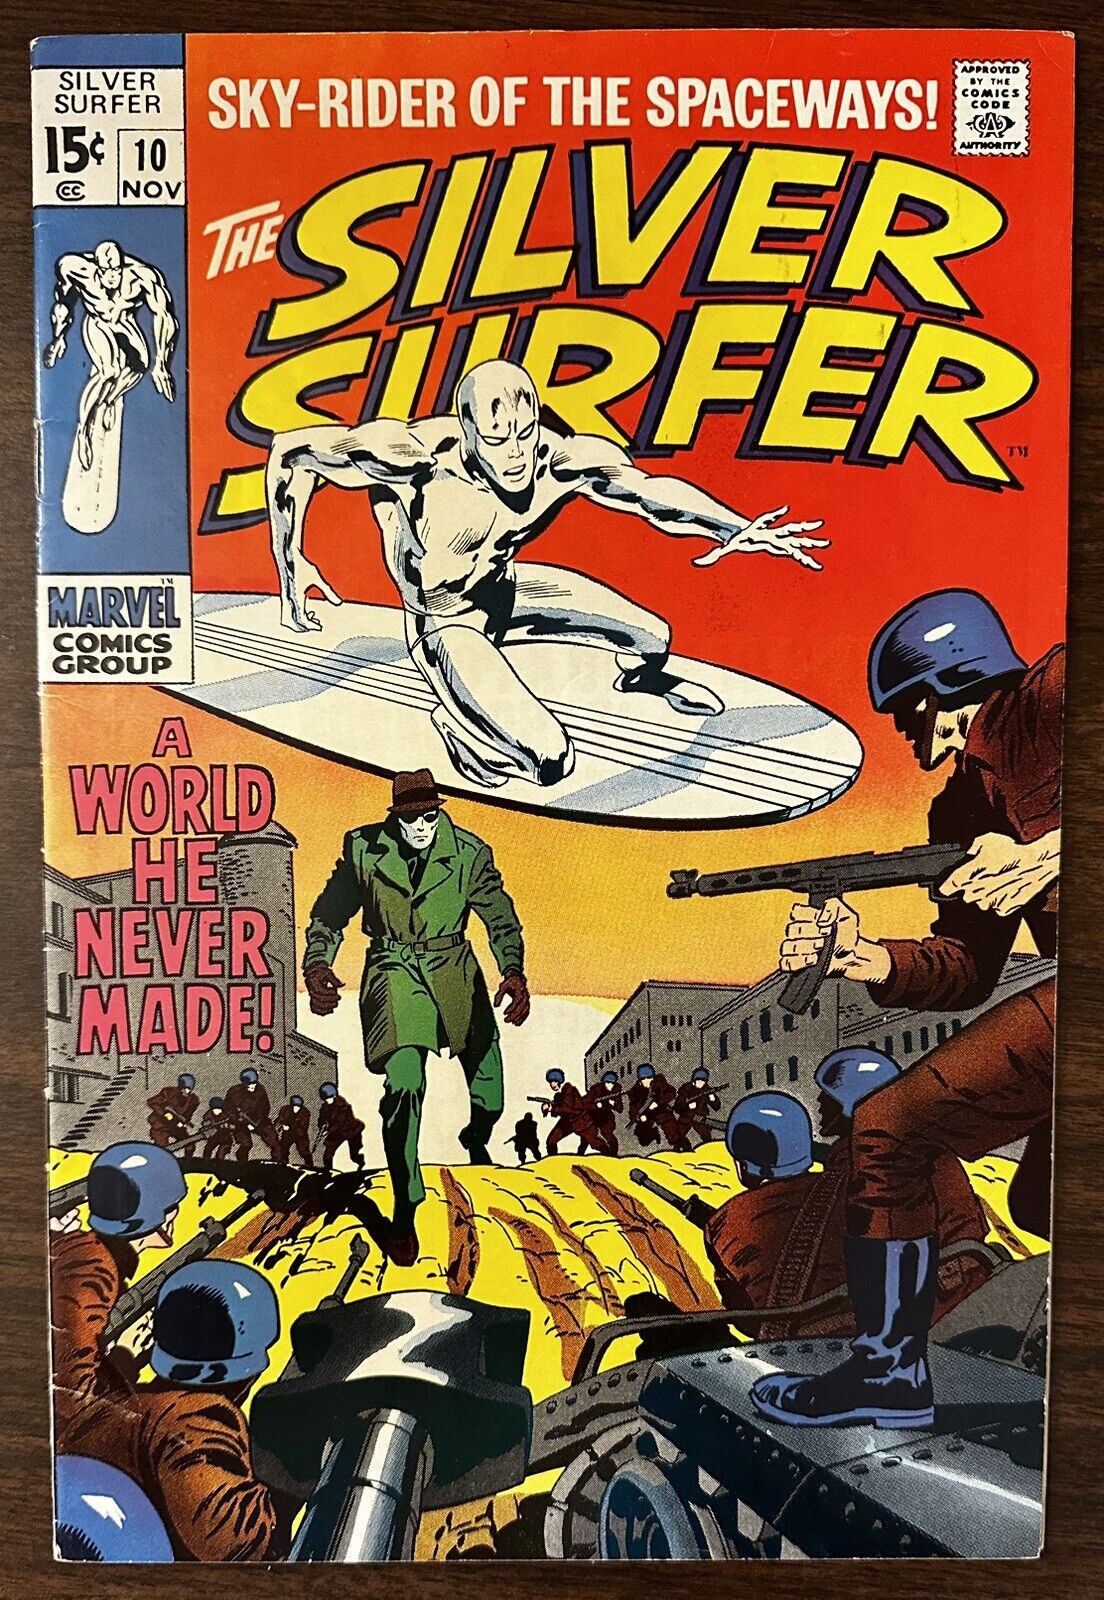 SILVER SURFER #10 GLOSSY 8.0-8.5 1969 BUSCEMA Super Deal 8.0 At A 7.5 Price